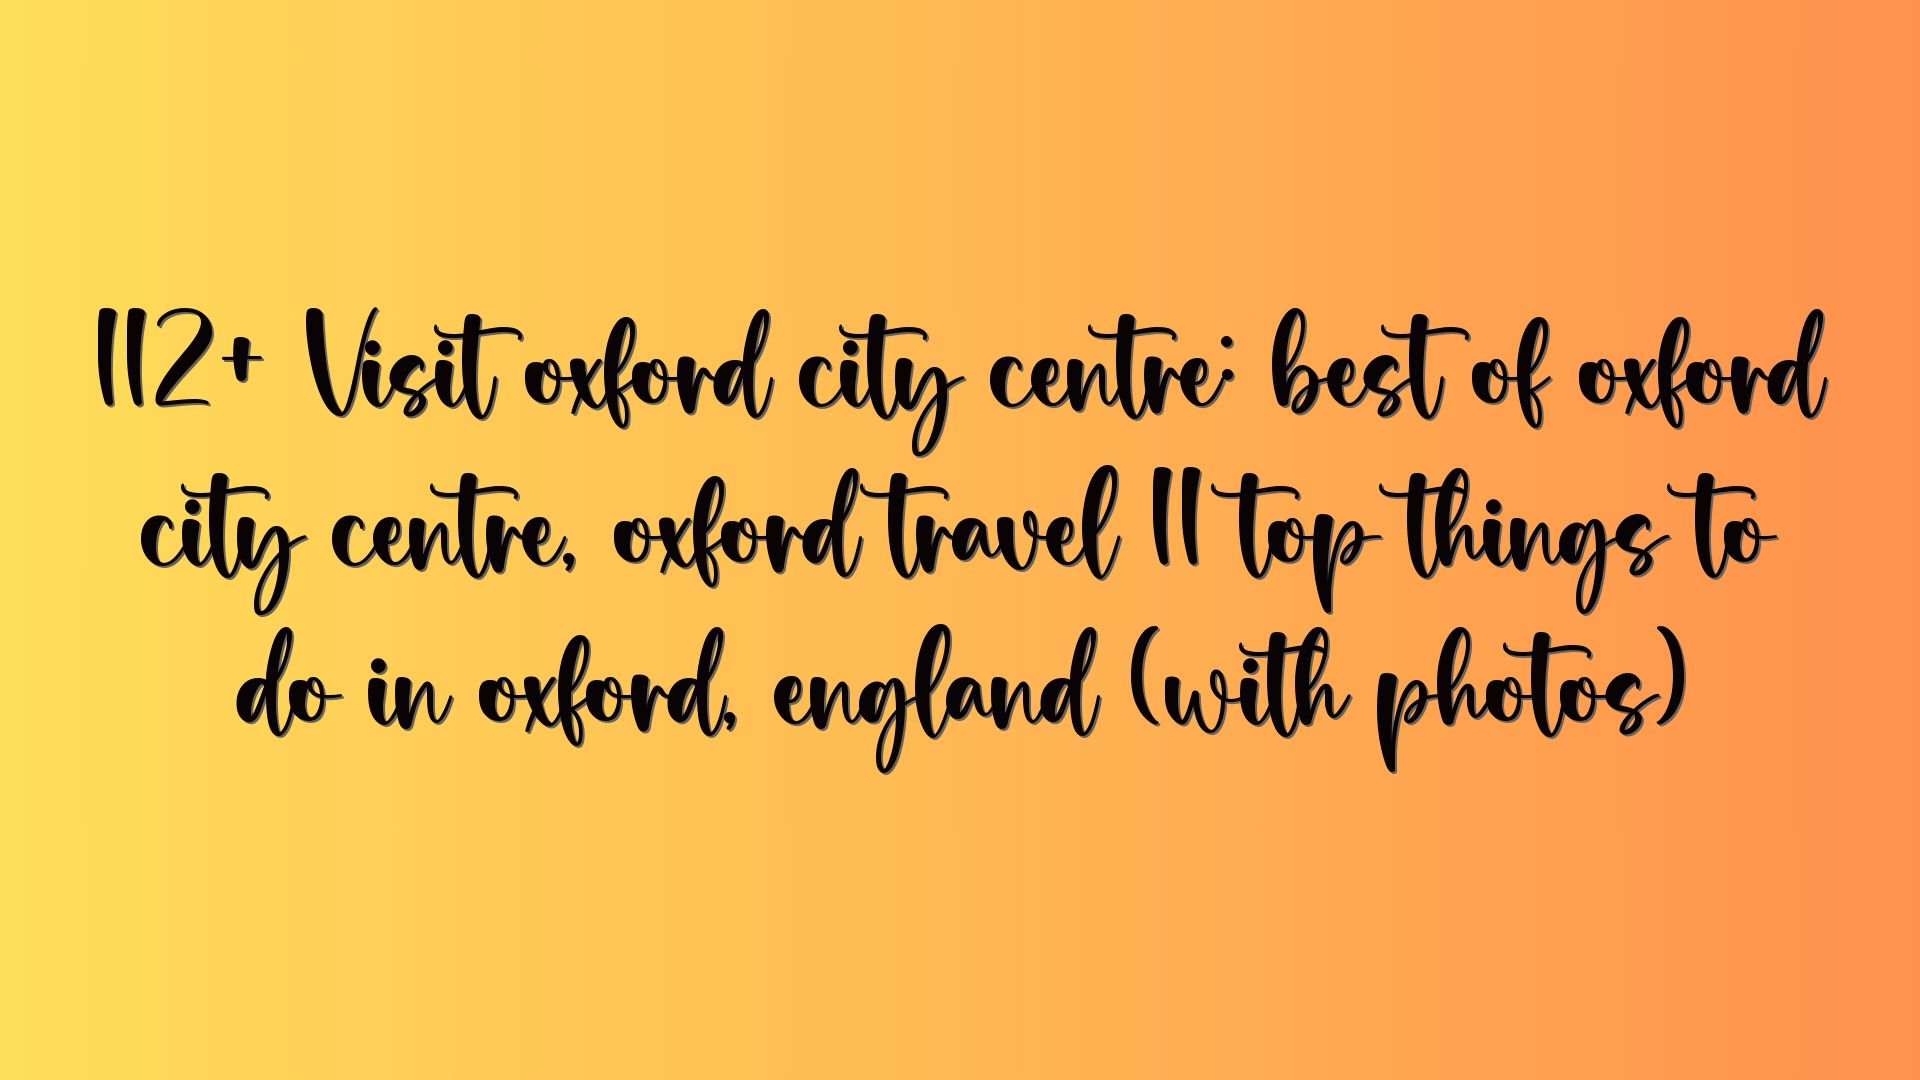 112+ Visit oxford city centre: best of oxford city centre, oxford travel 11 top things to do in oxford, england (with photos)